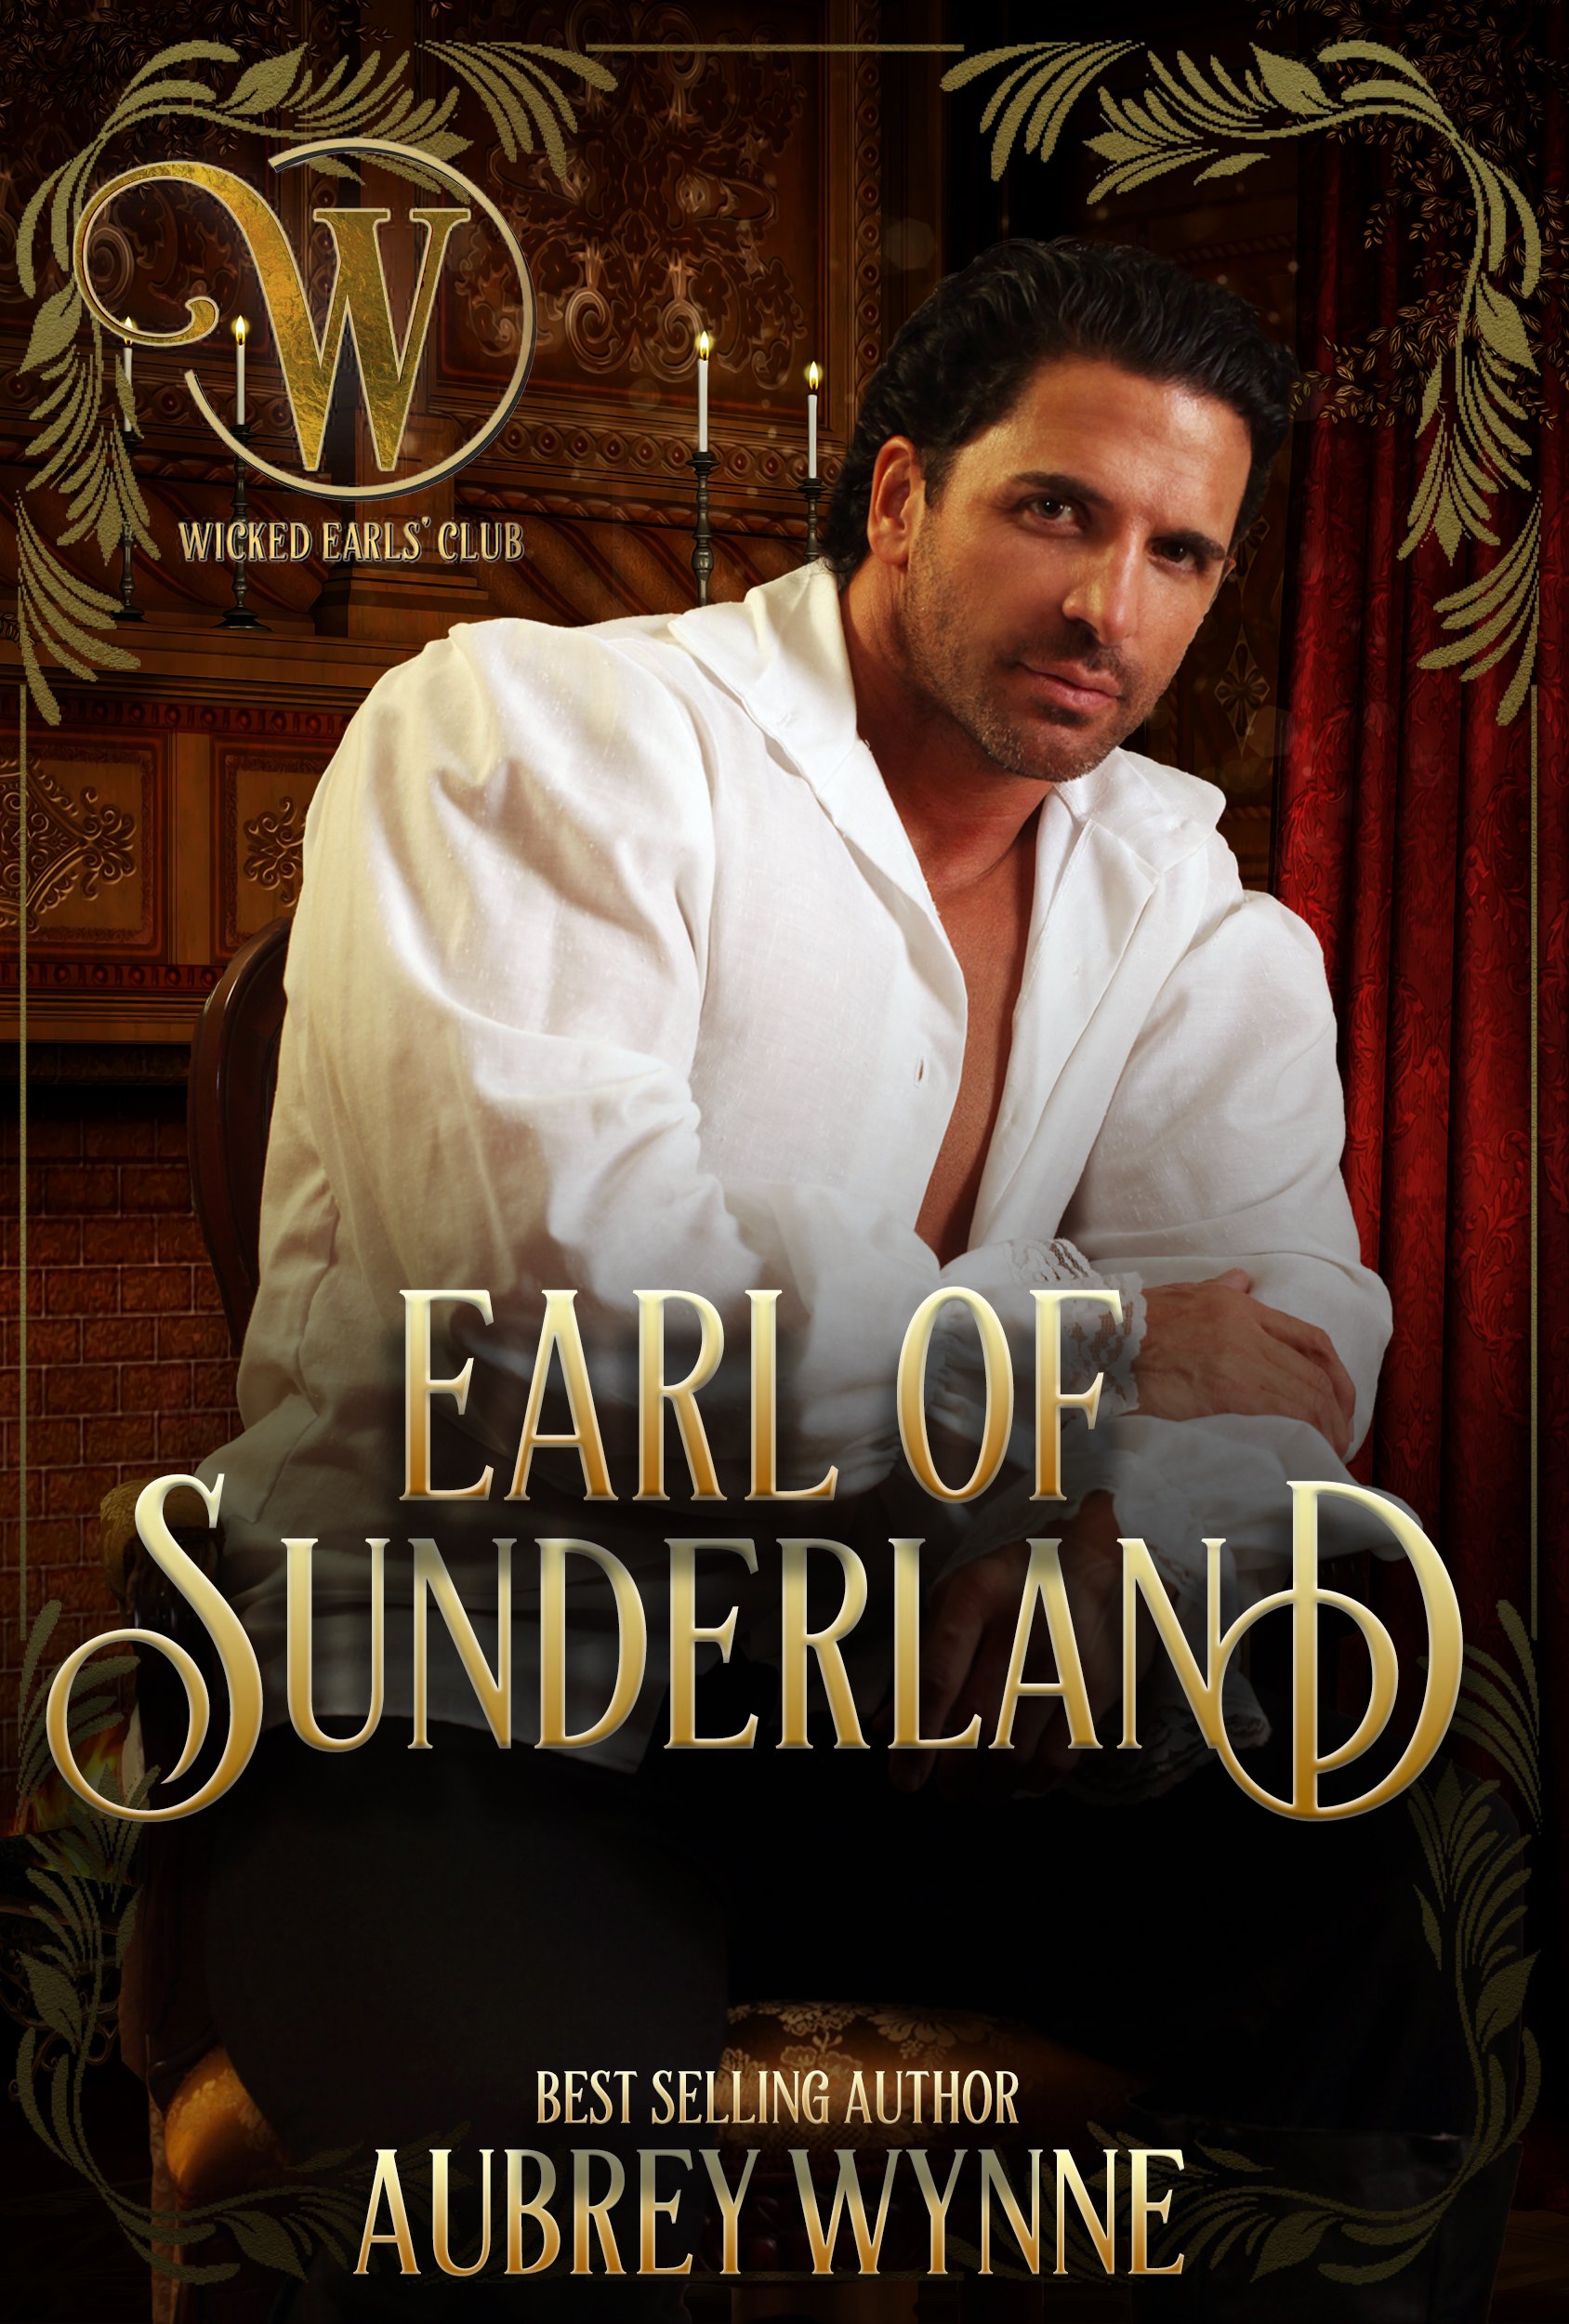 Book Cover The Earl of Sunderland: Wicked Earls' Club (Once Upon A Widow Book 1)